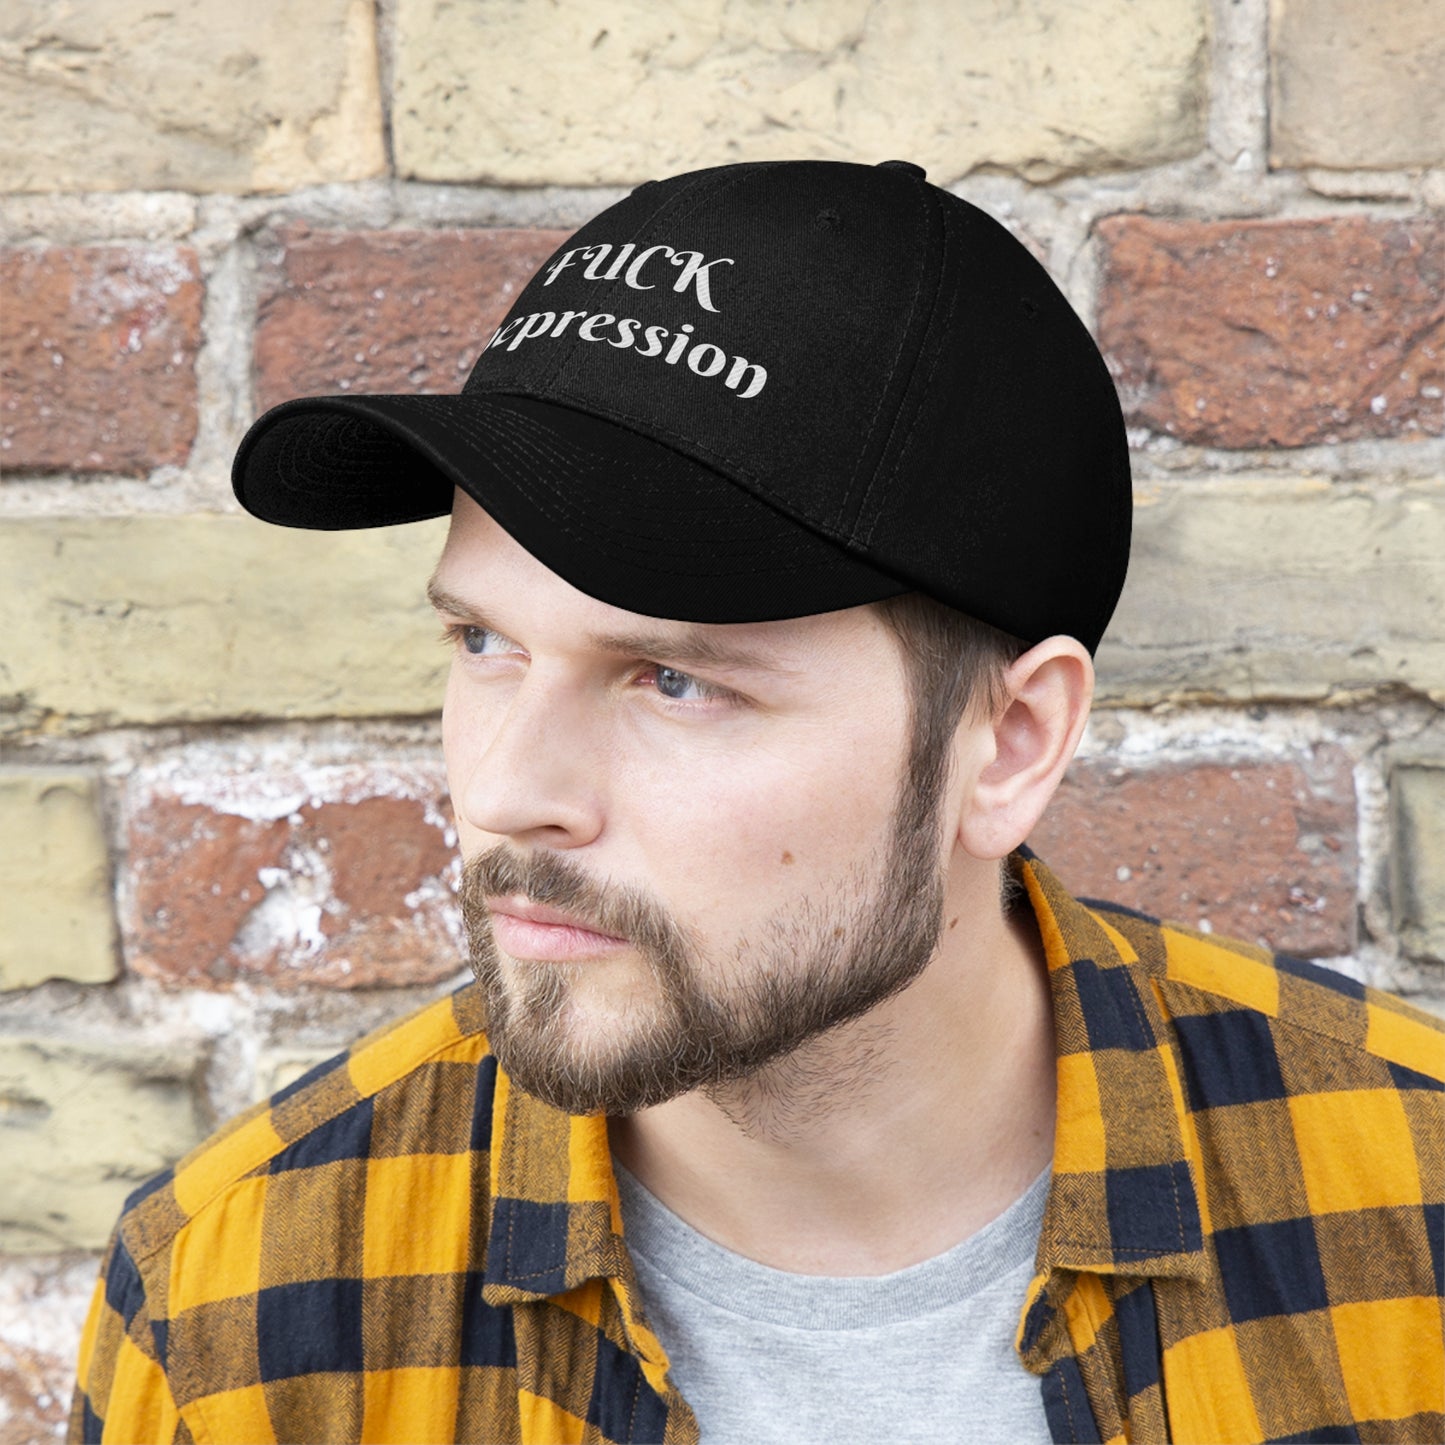 Fuck Depression Embroidered Hat for Empowerment and Awareness